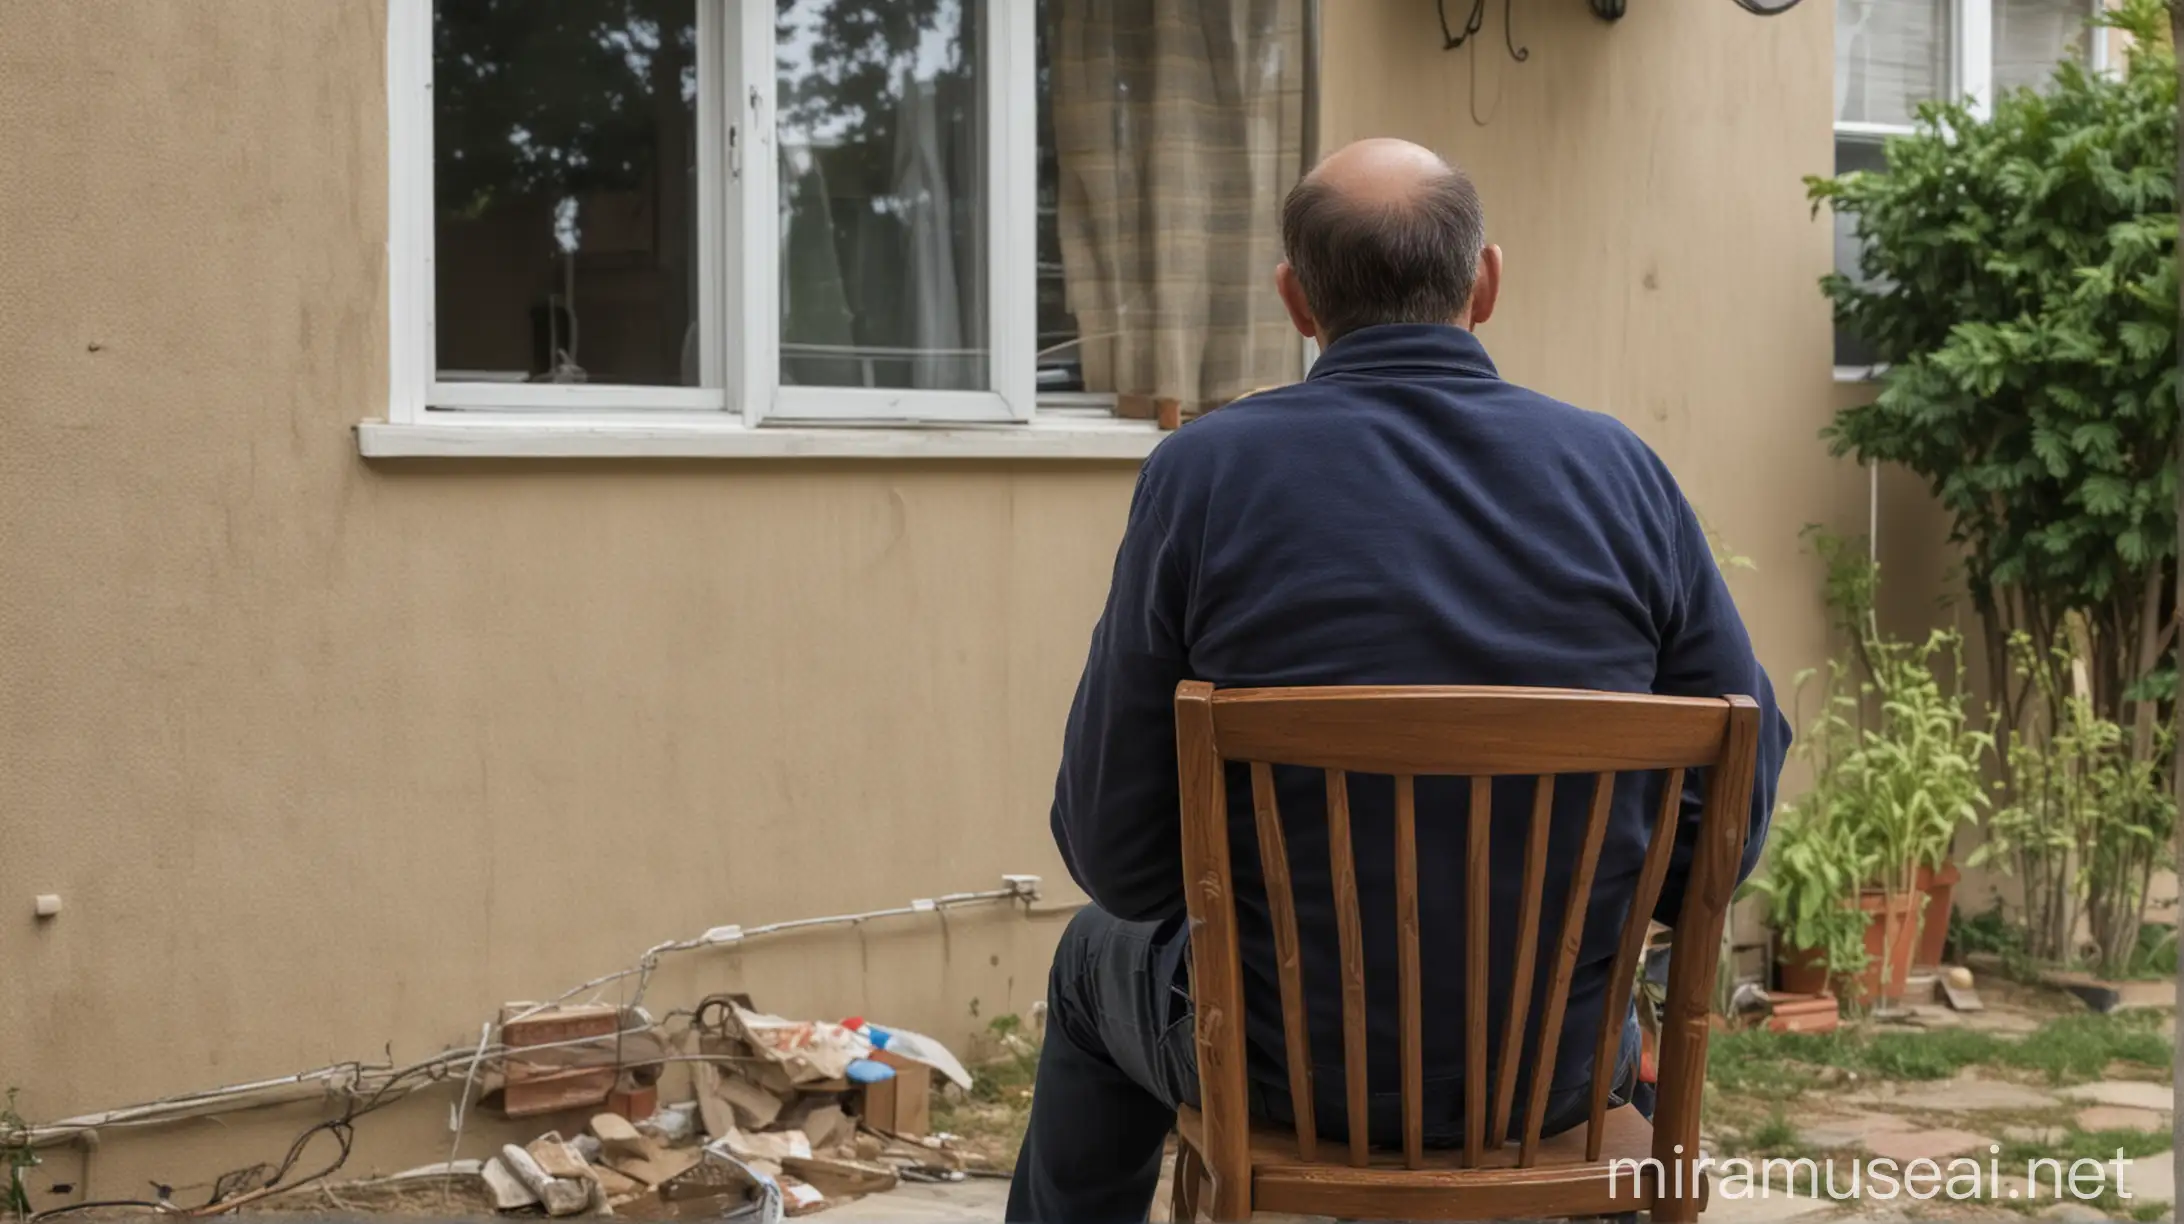 Middleaged Man Contemplating Home Outdoor Scene from Behind